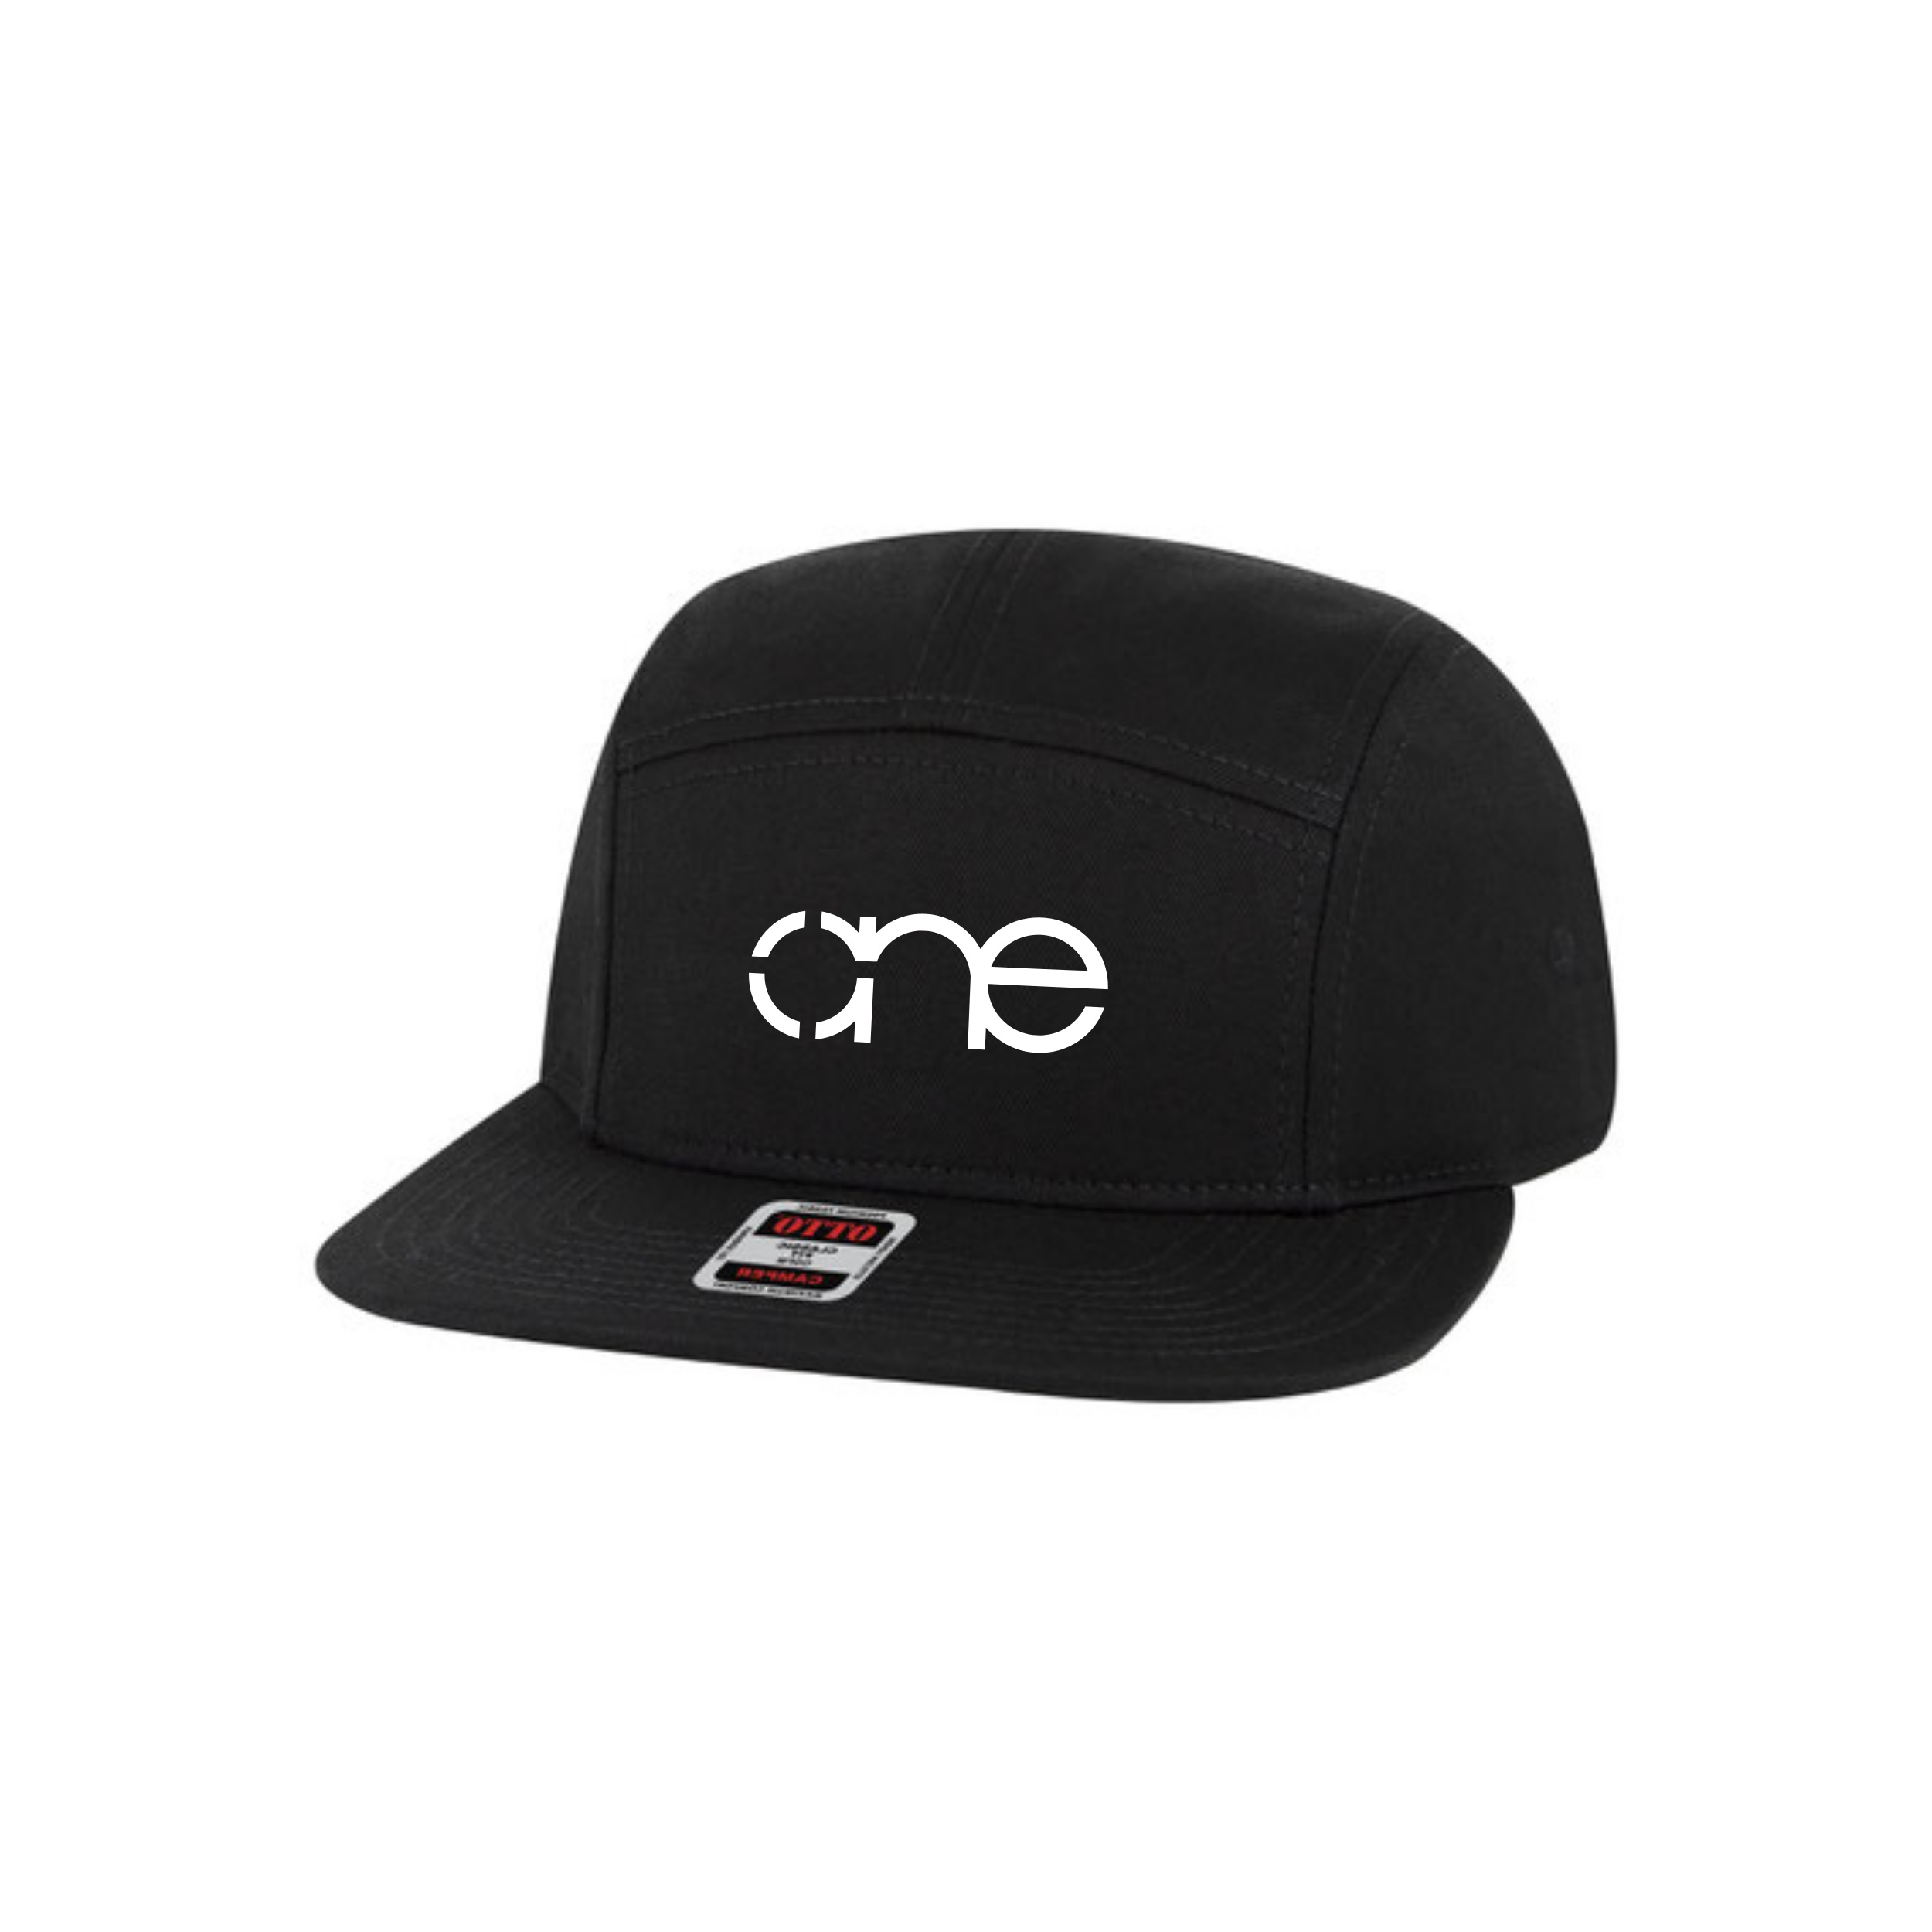 Black “One” 5 Panel Camper Hat with White logo, snapback, front.